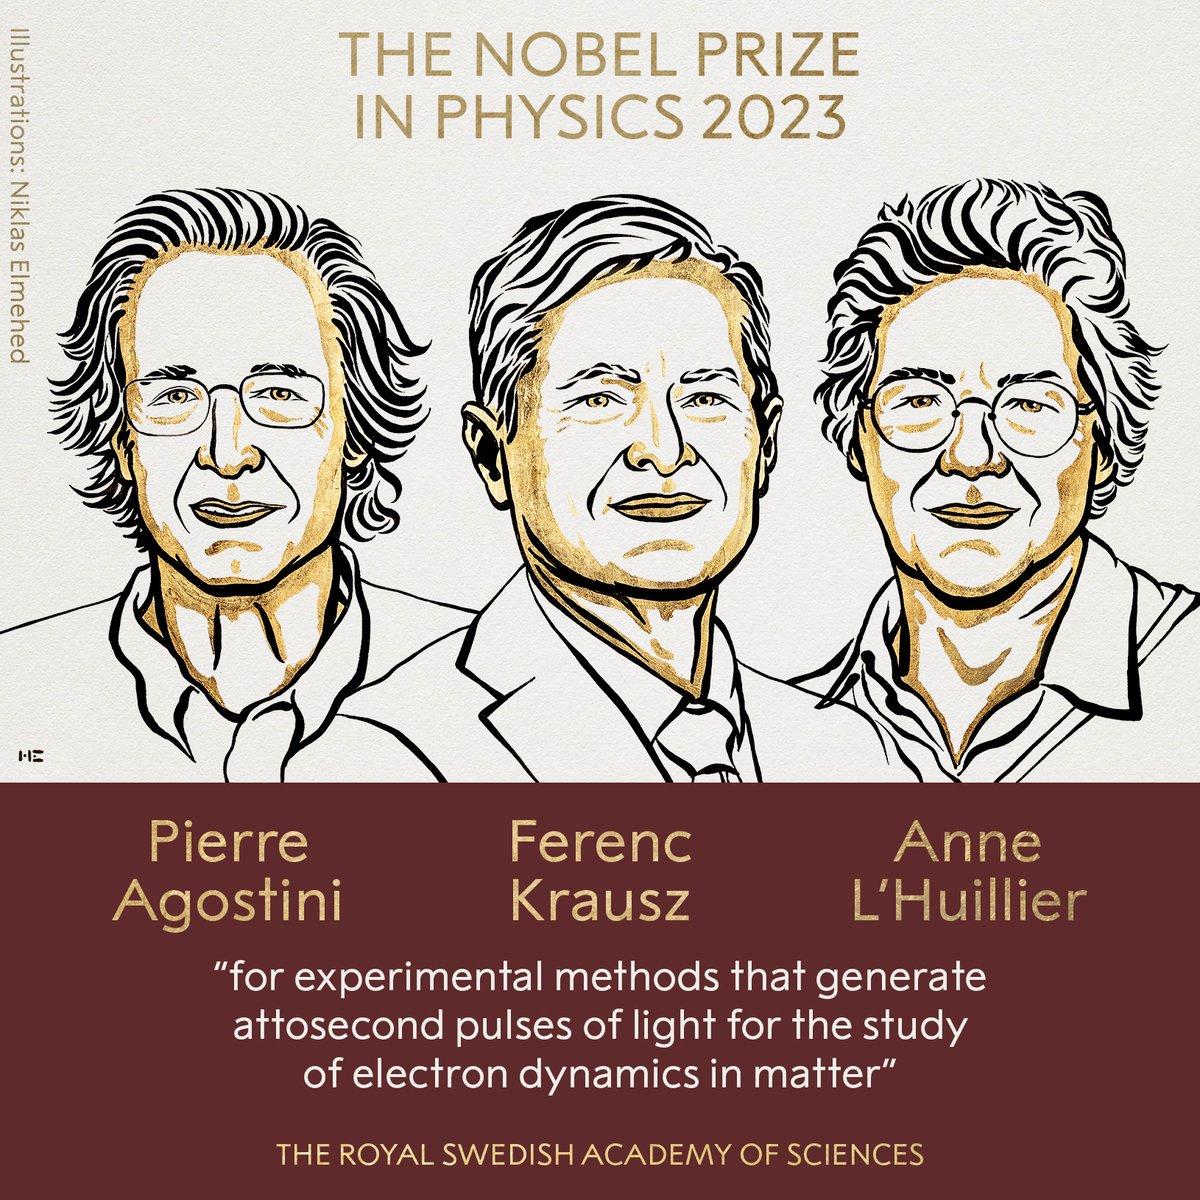 The Royal Swedish Academy of Sciences has decided to award the 2023 Nobel Prize in Physics to Pierre Agostini, Ferenc Krausz and Anne L’Huillier “for experimental methods that generate attosecond pulses of light for the study of electron dynamics in matter.”